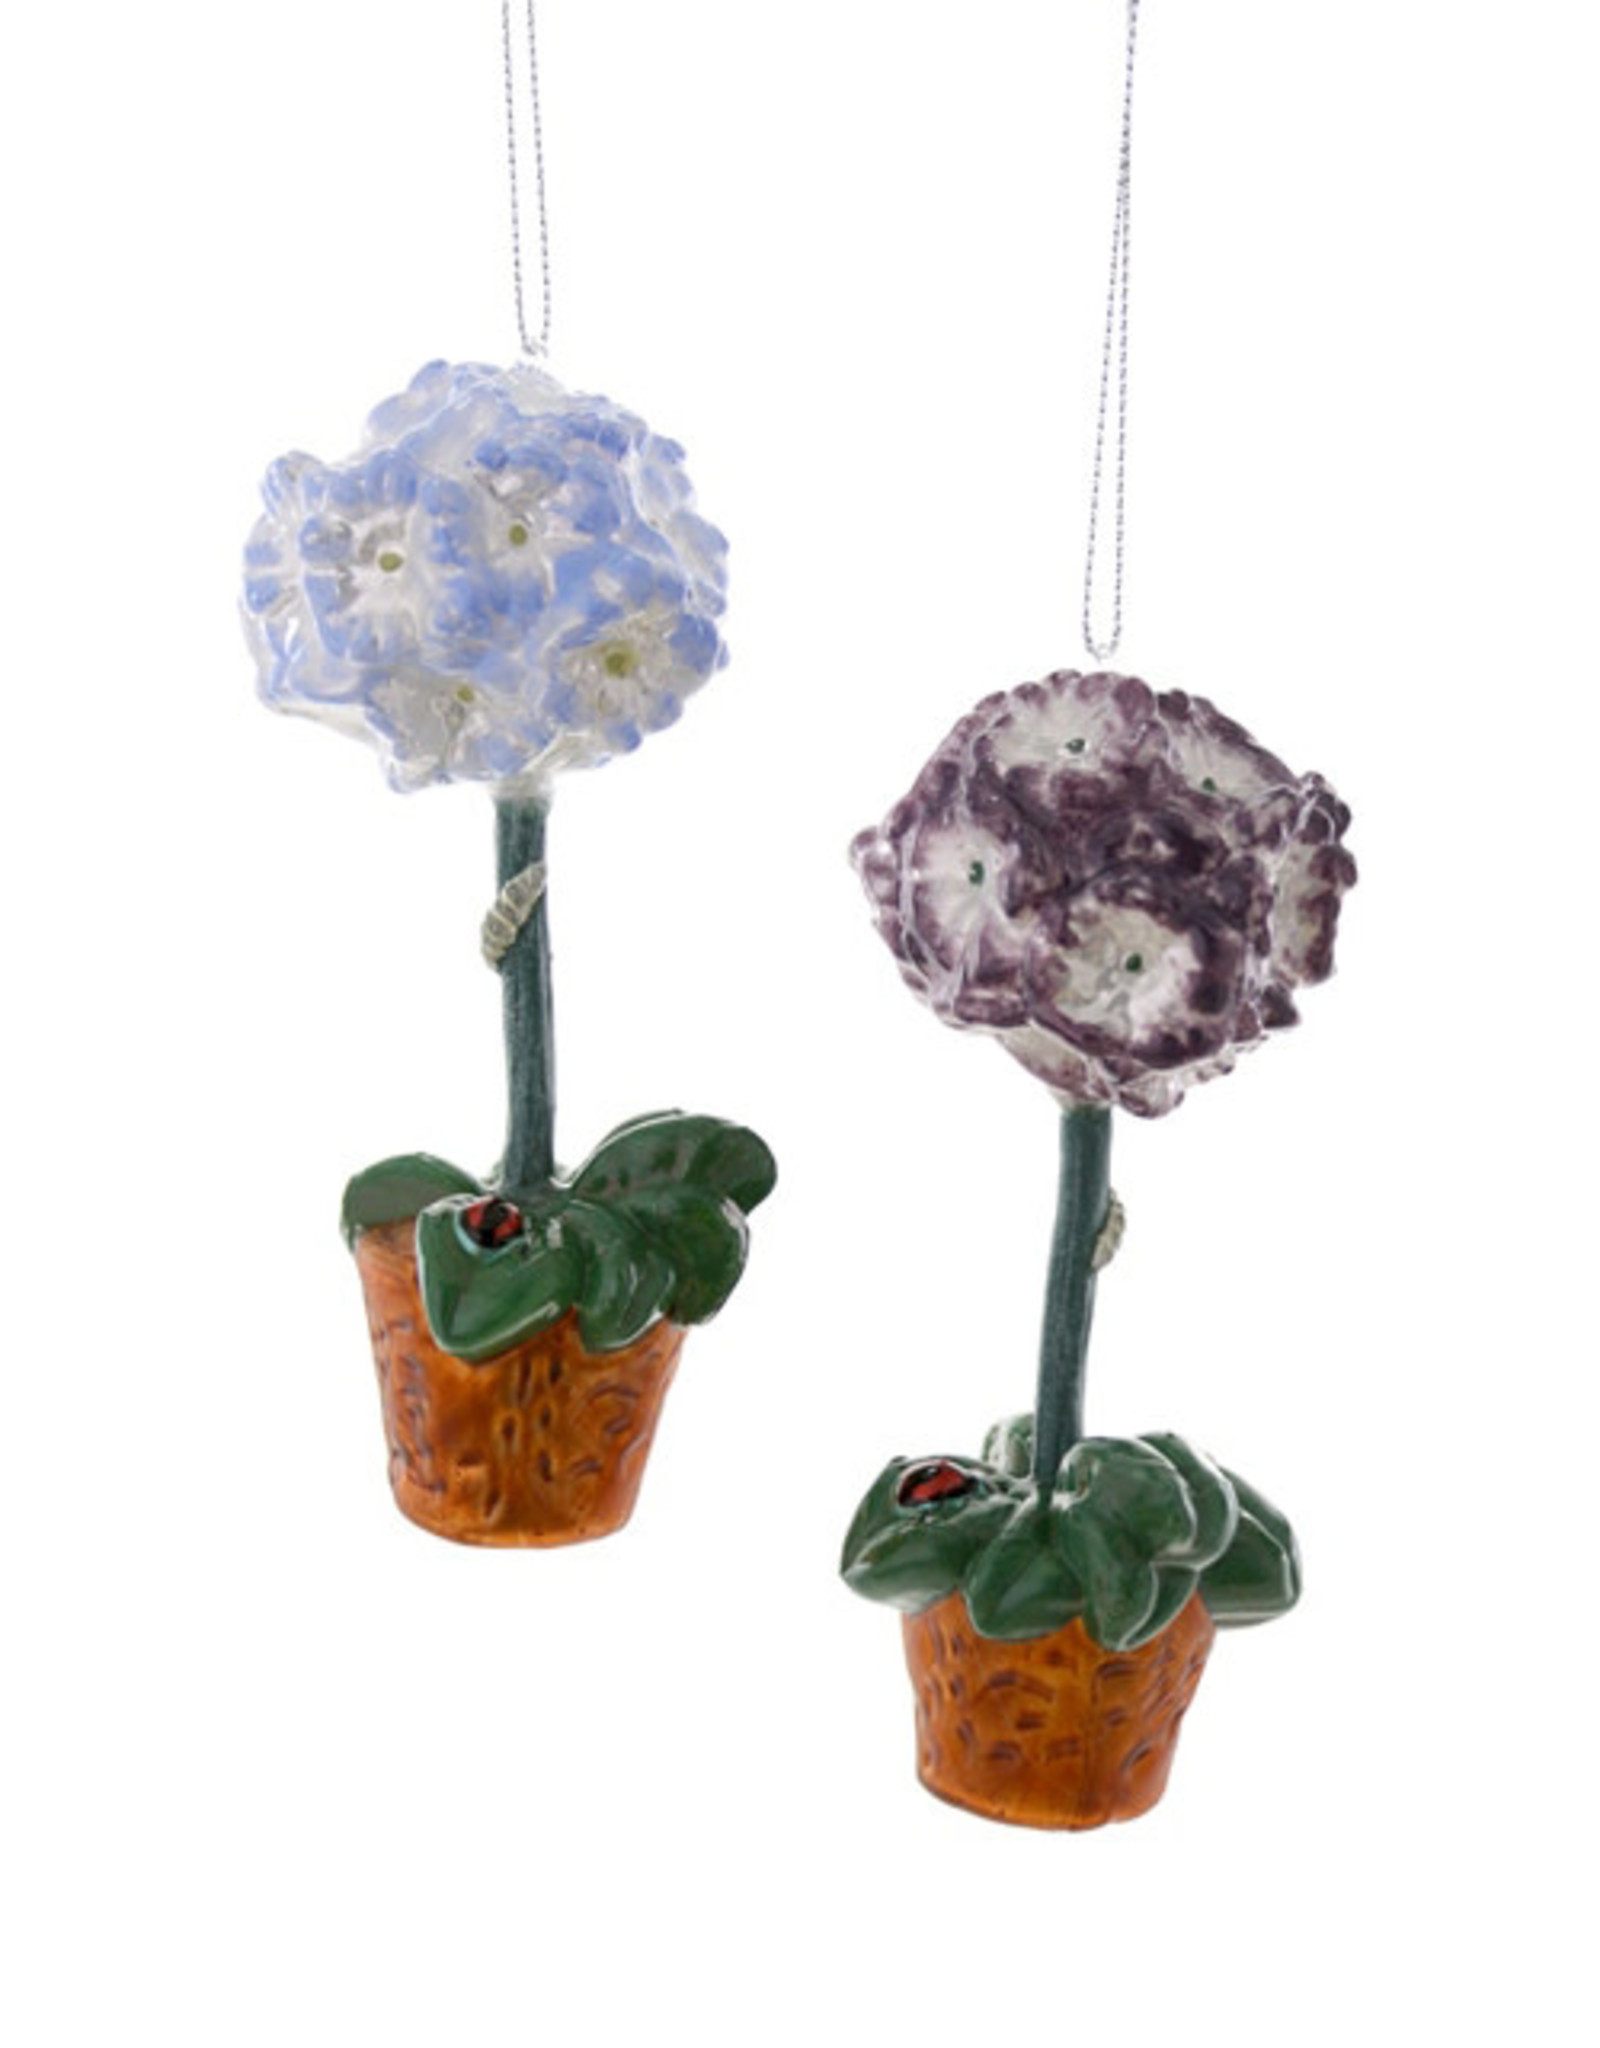 Cody Foster & Co. POTTED PRIMROSE ORNAMENT - 2 STYLES